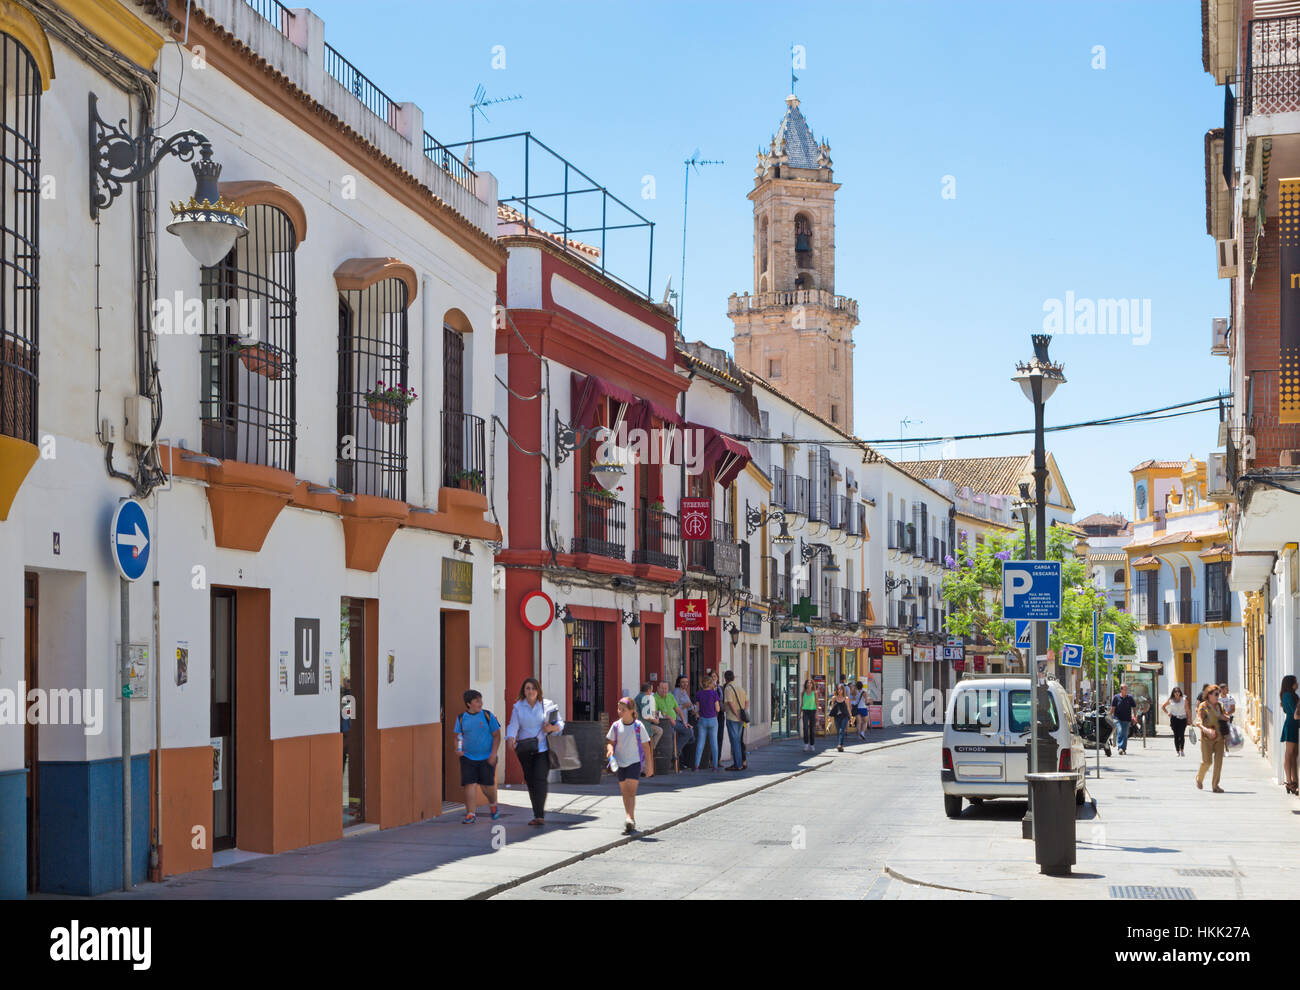 CORDOBA, SPAIN - MAY 26, 2015: The typical Andalusian street. Stock Photo